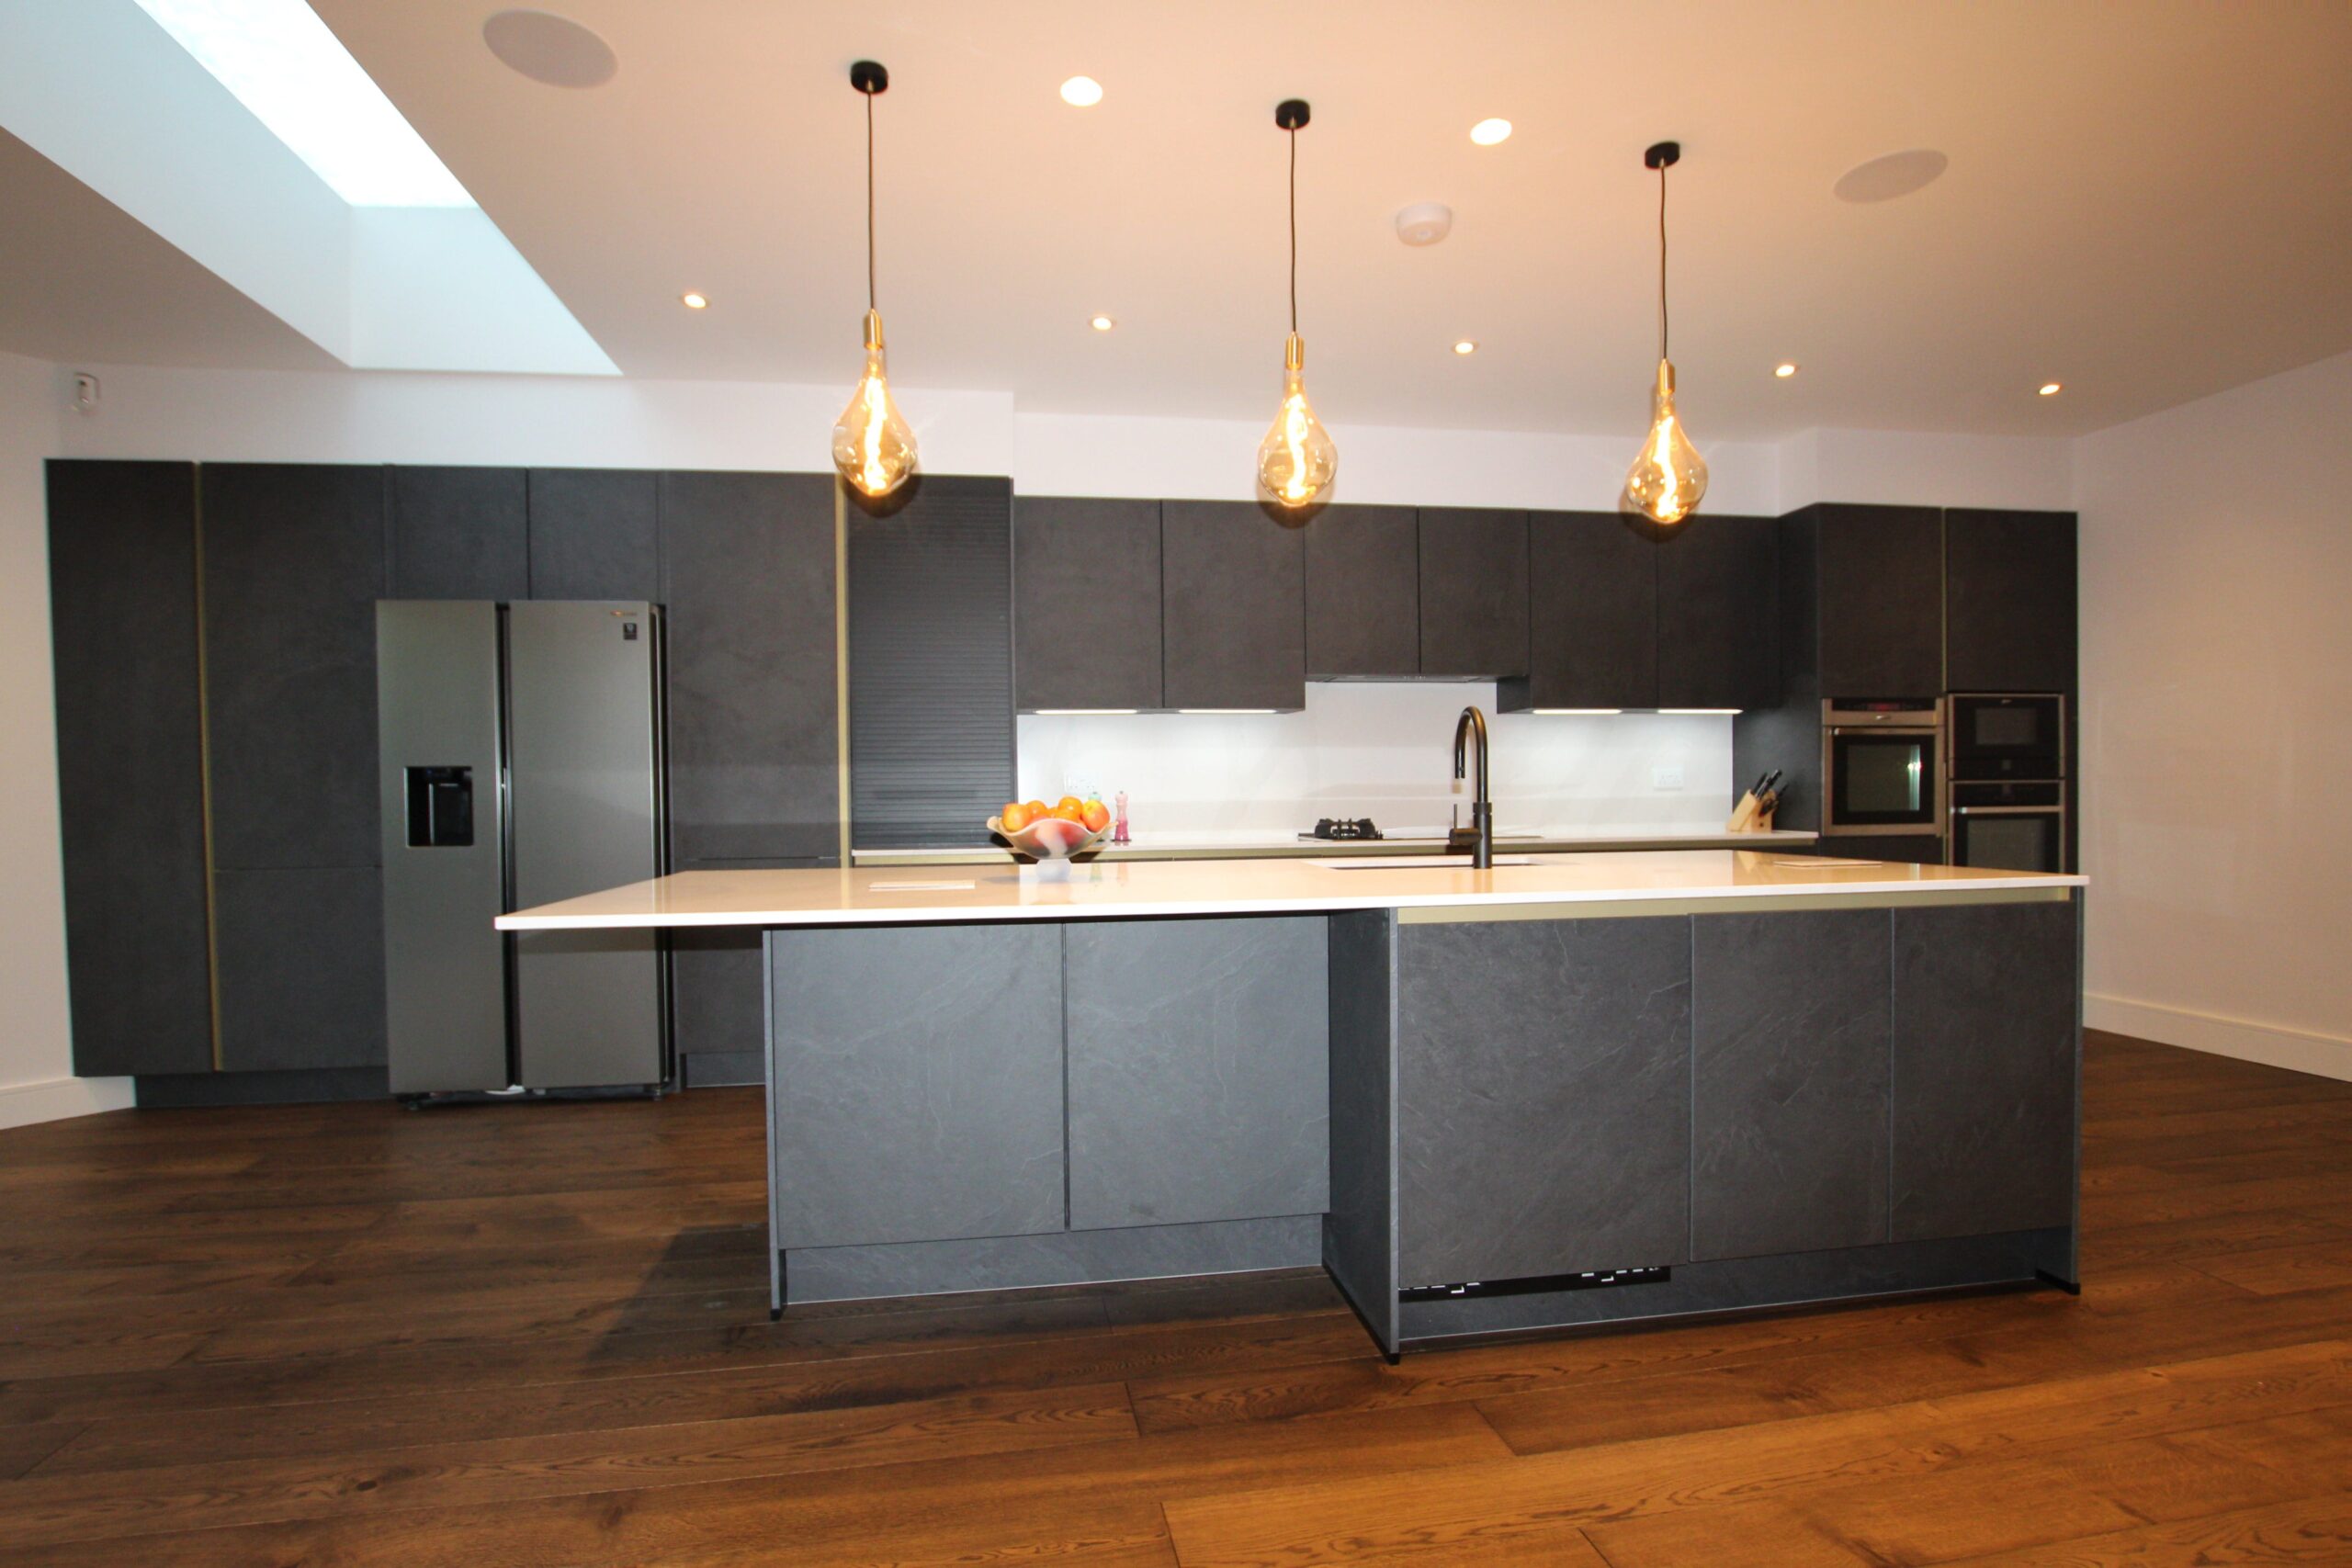 N3 Finchley Recent project German kitchen